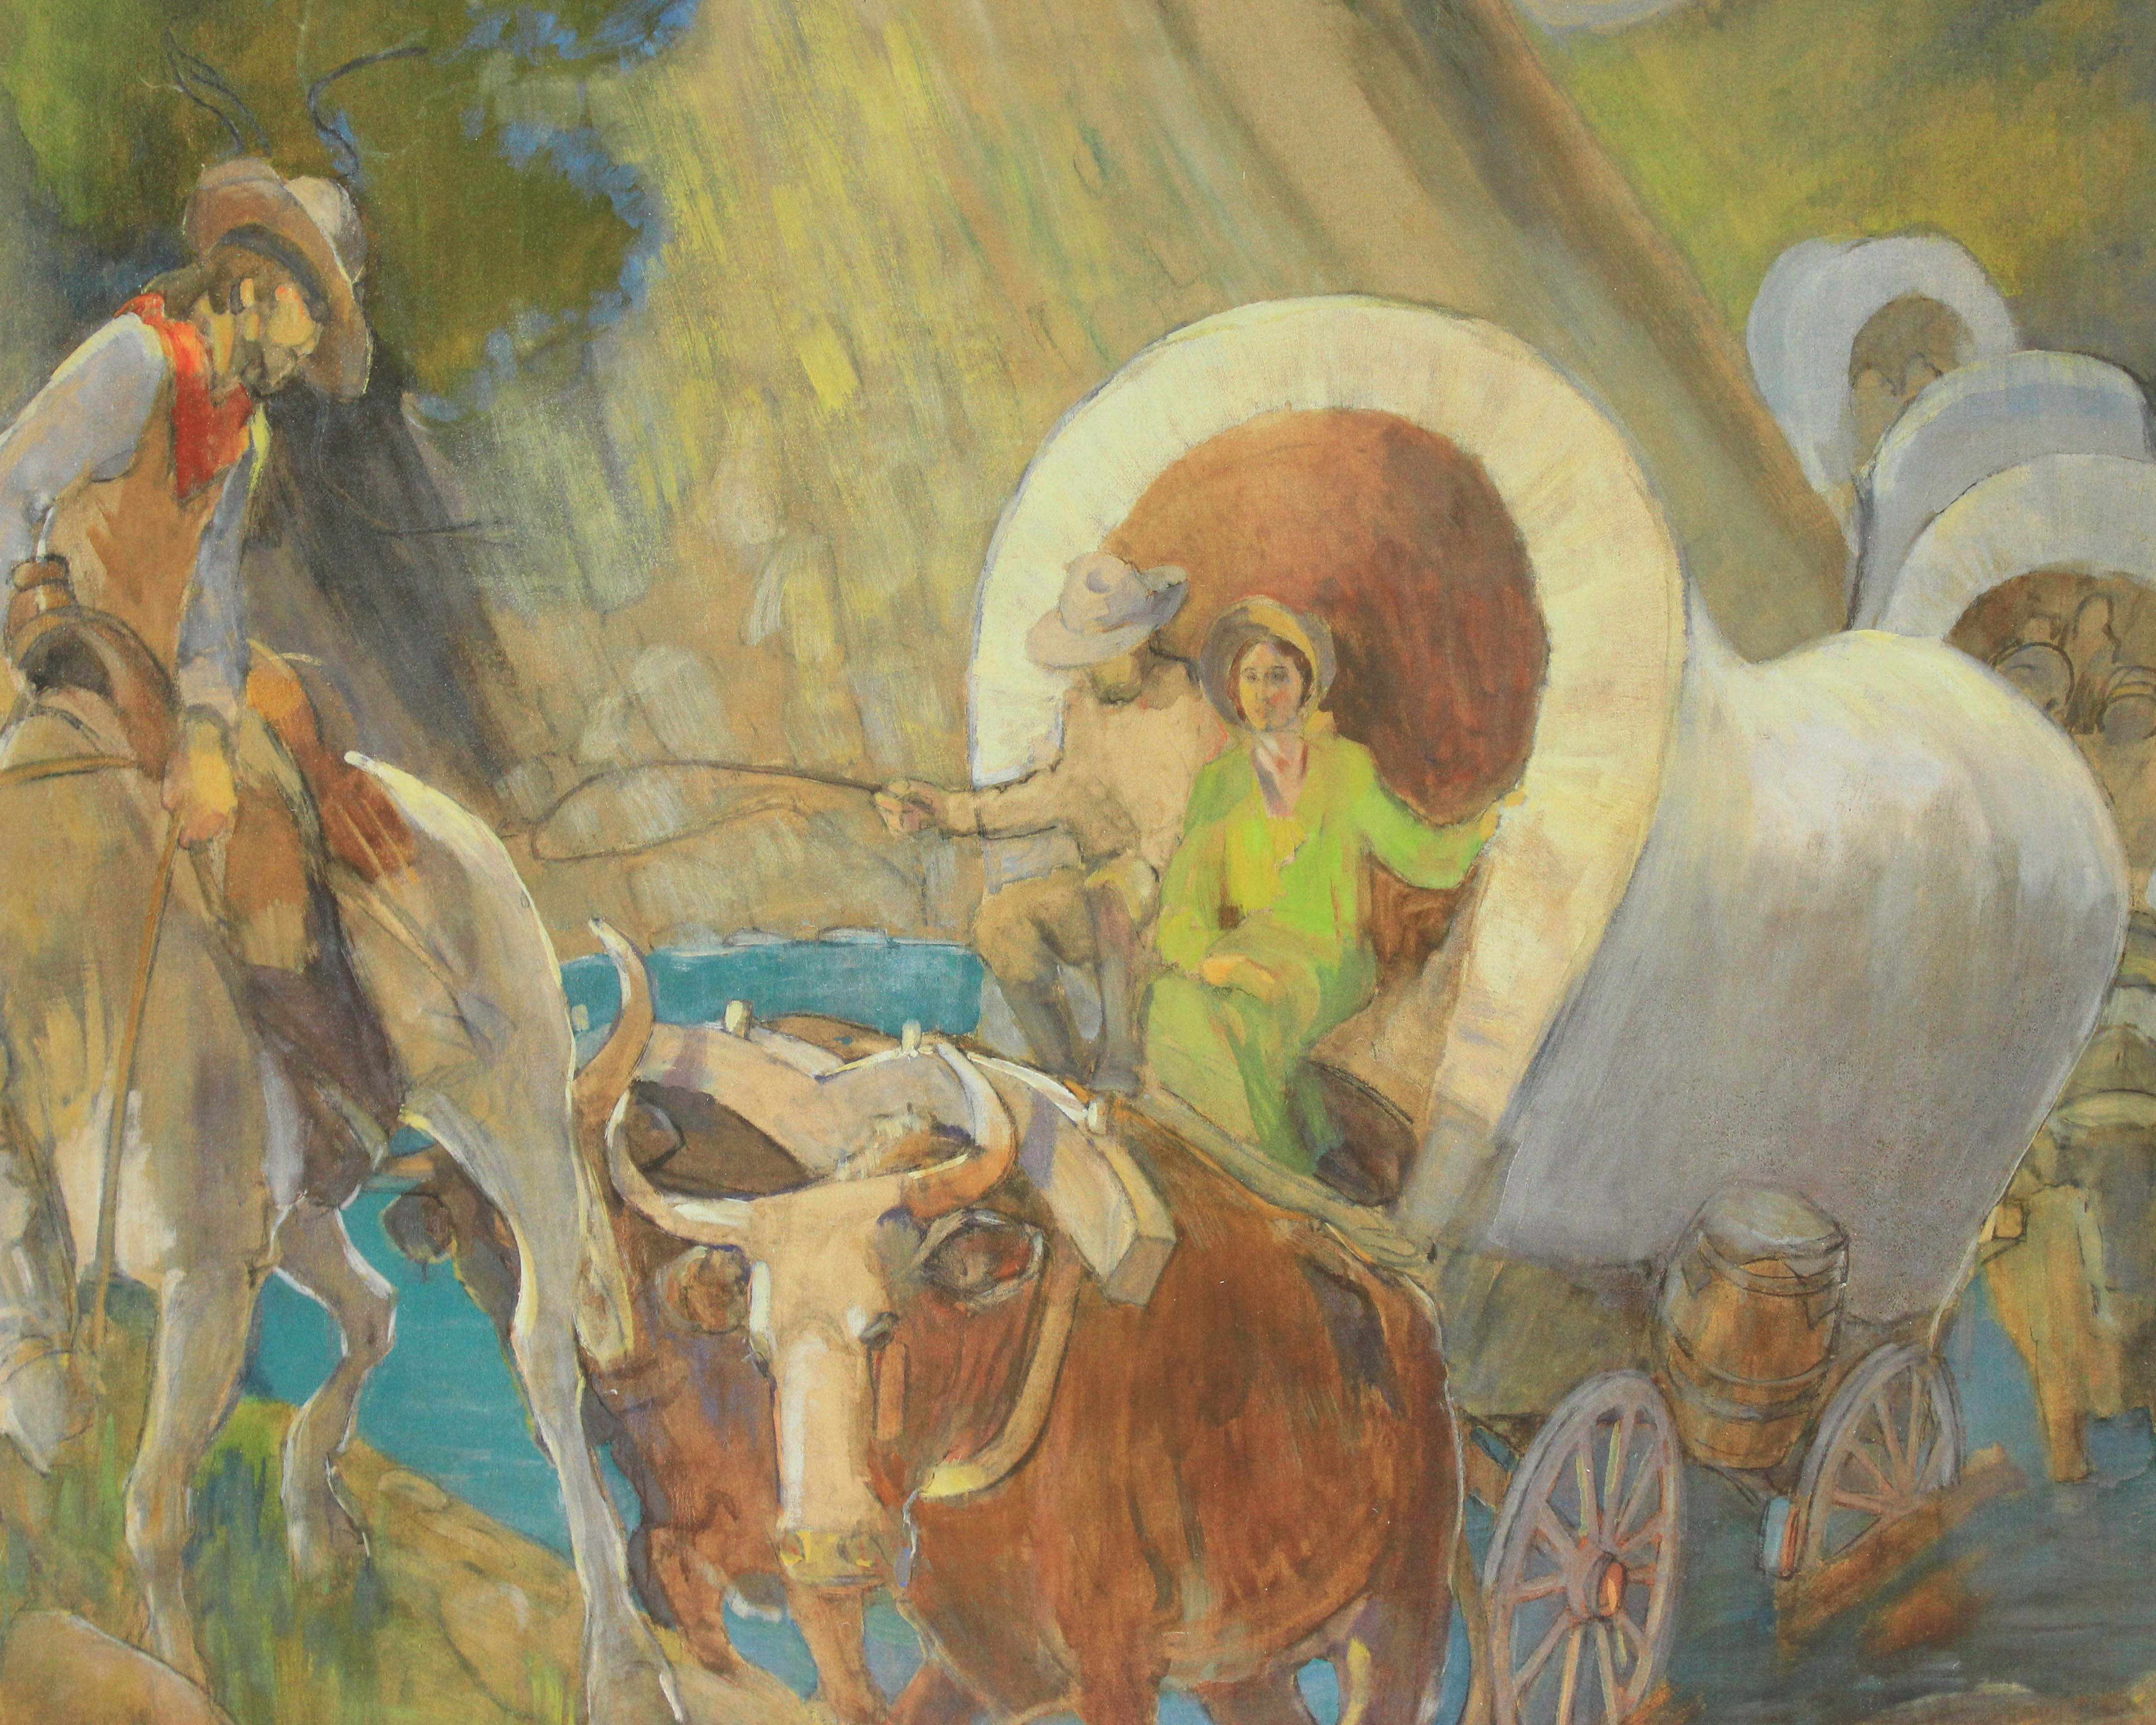 Covered Wagon Pioneers by Minerva Teichert prints for sale at High Desert Dry Goods